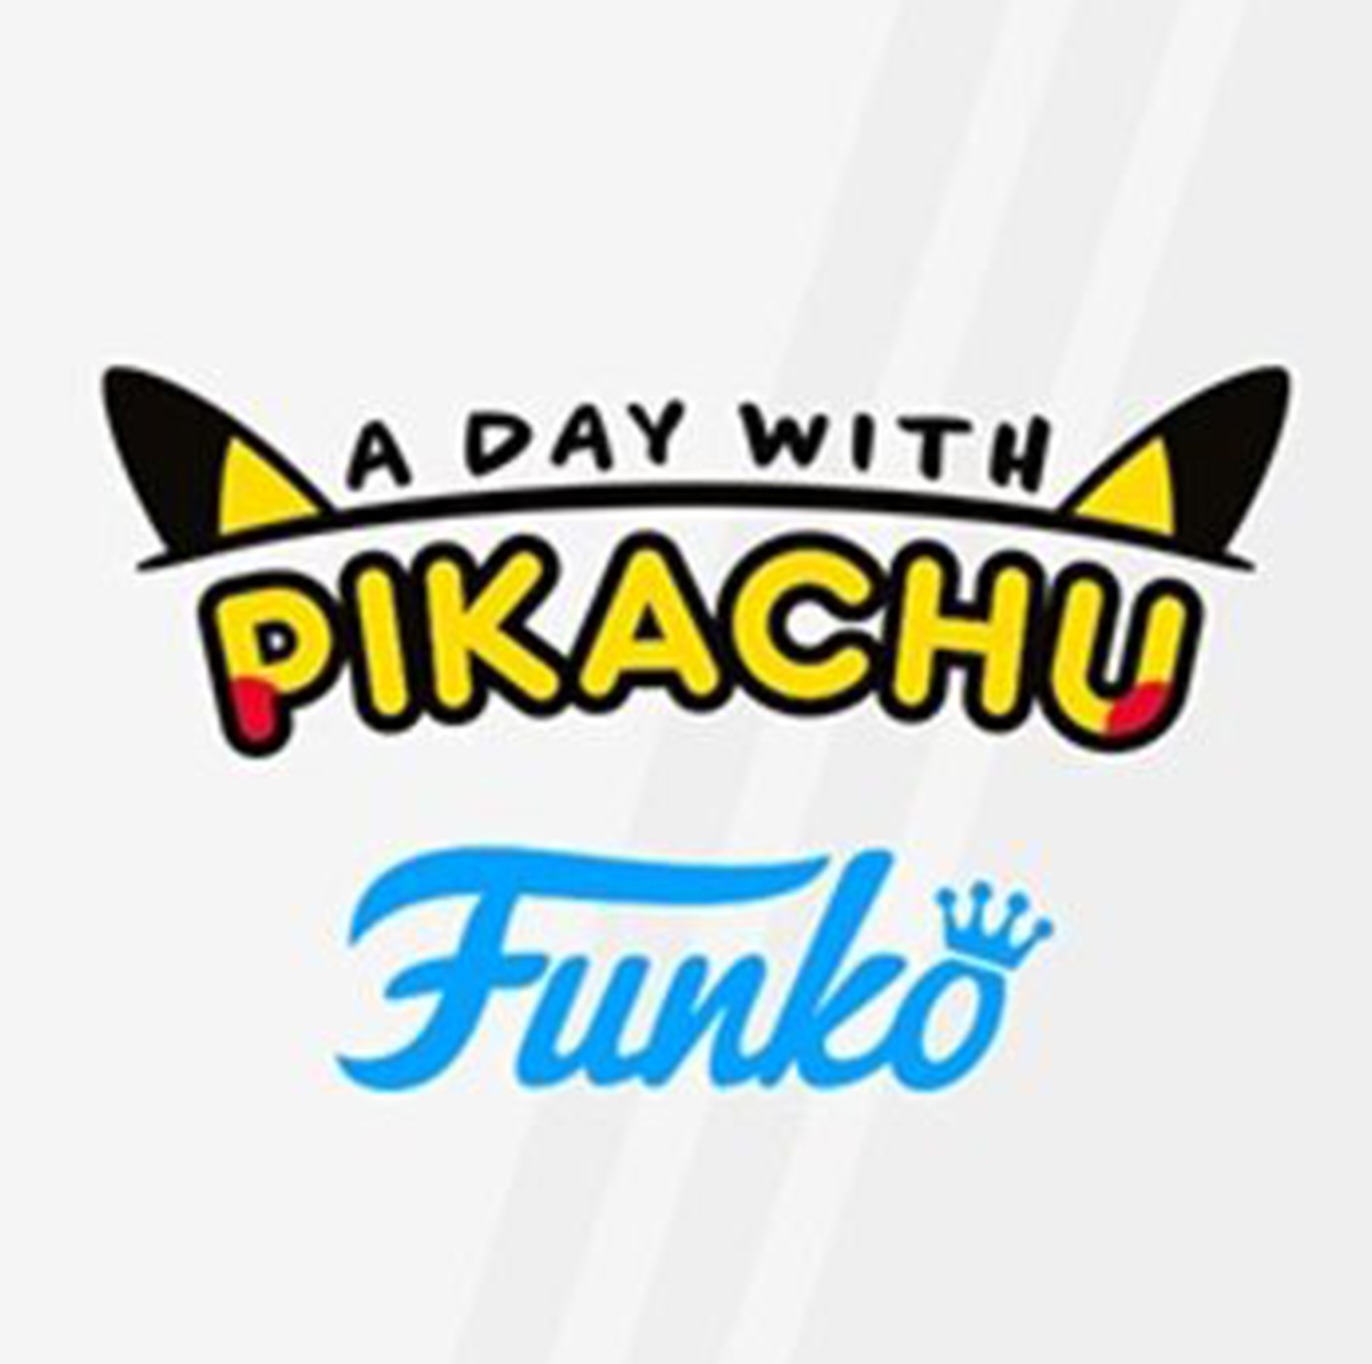 A day with Pikachu